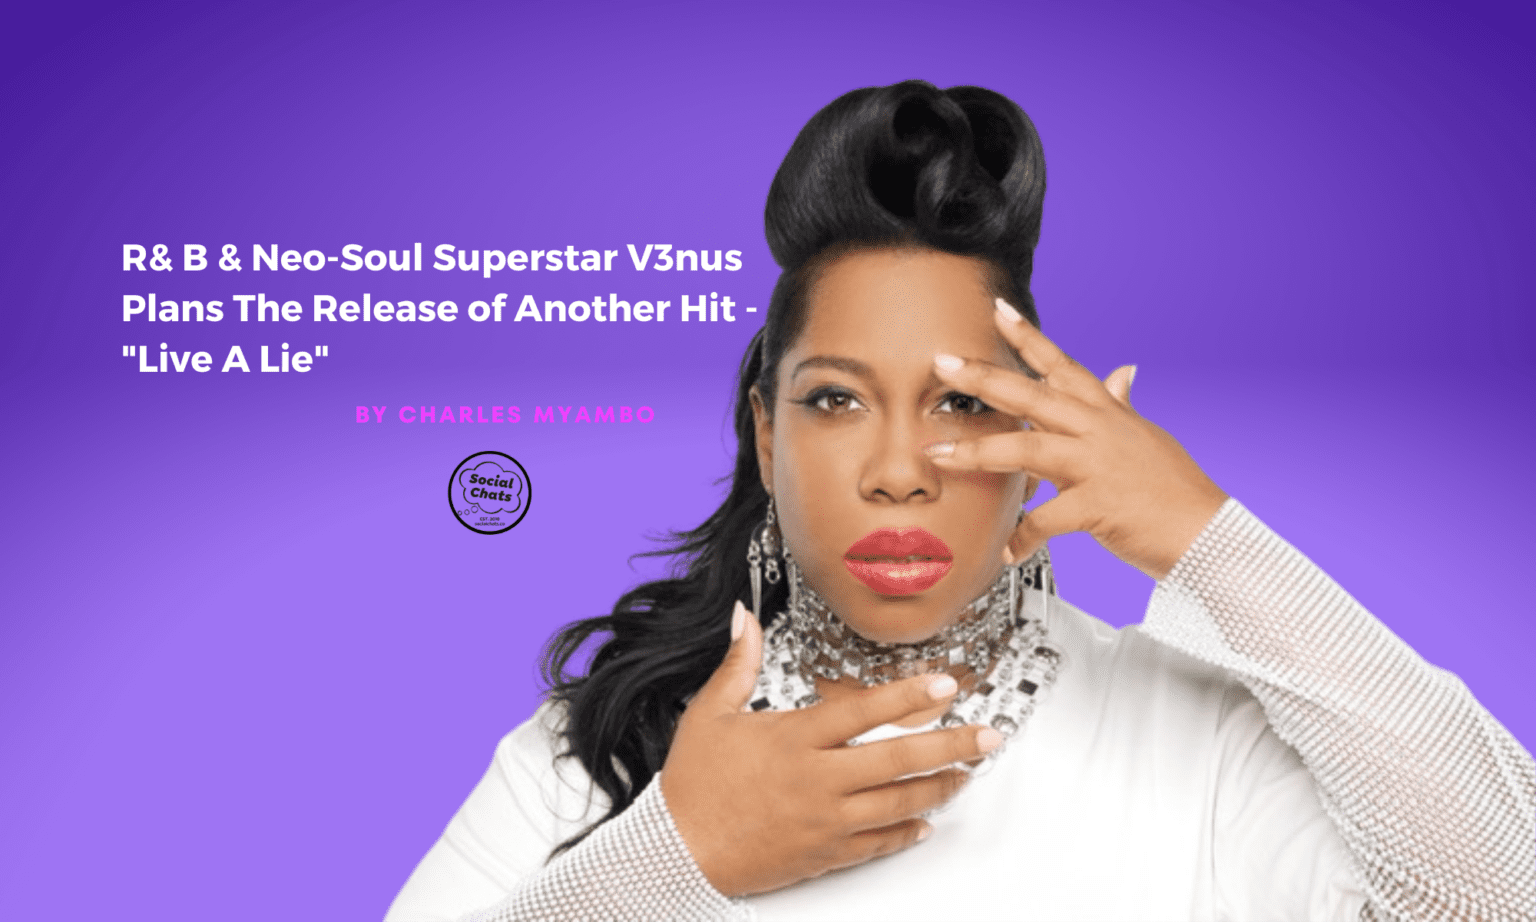 R&B & Neo-Soul Superstar V3nus Plans The Release of Another Hit - “Live A Lie” by Charles Myambo